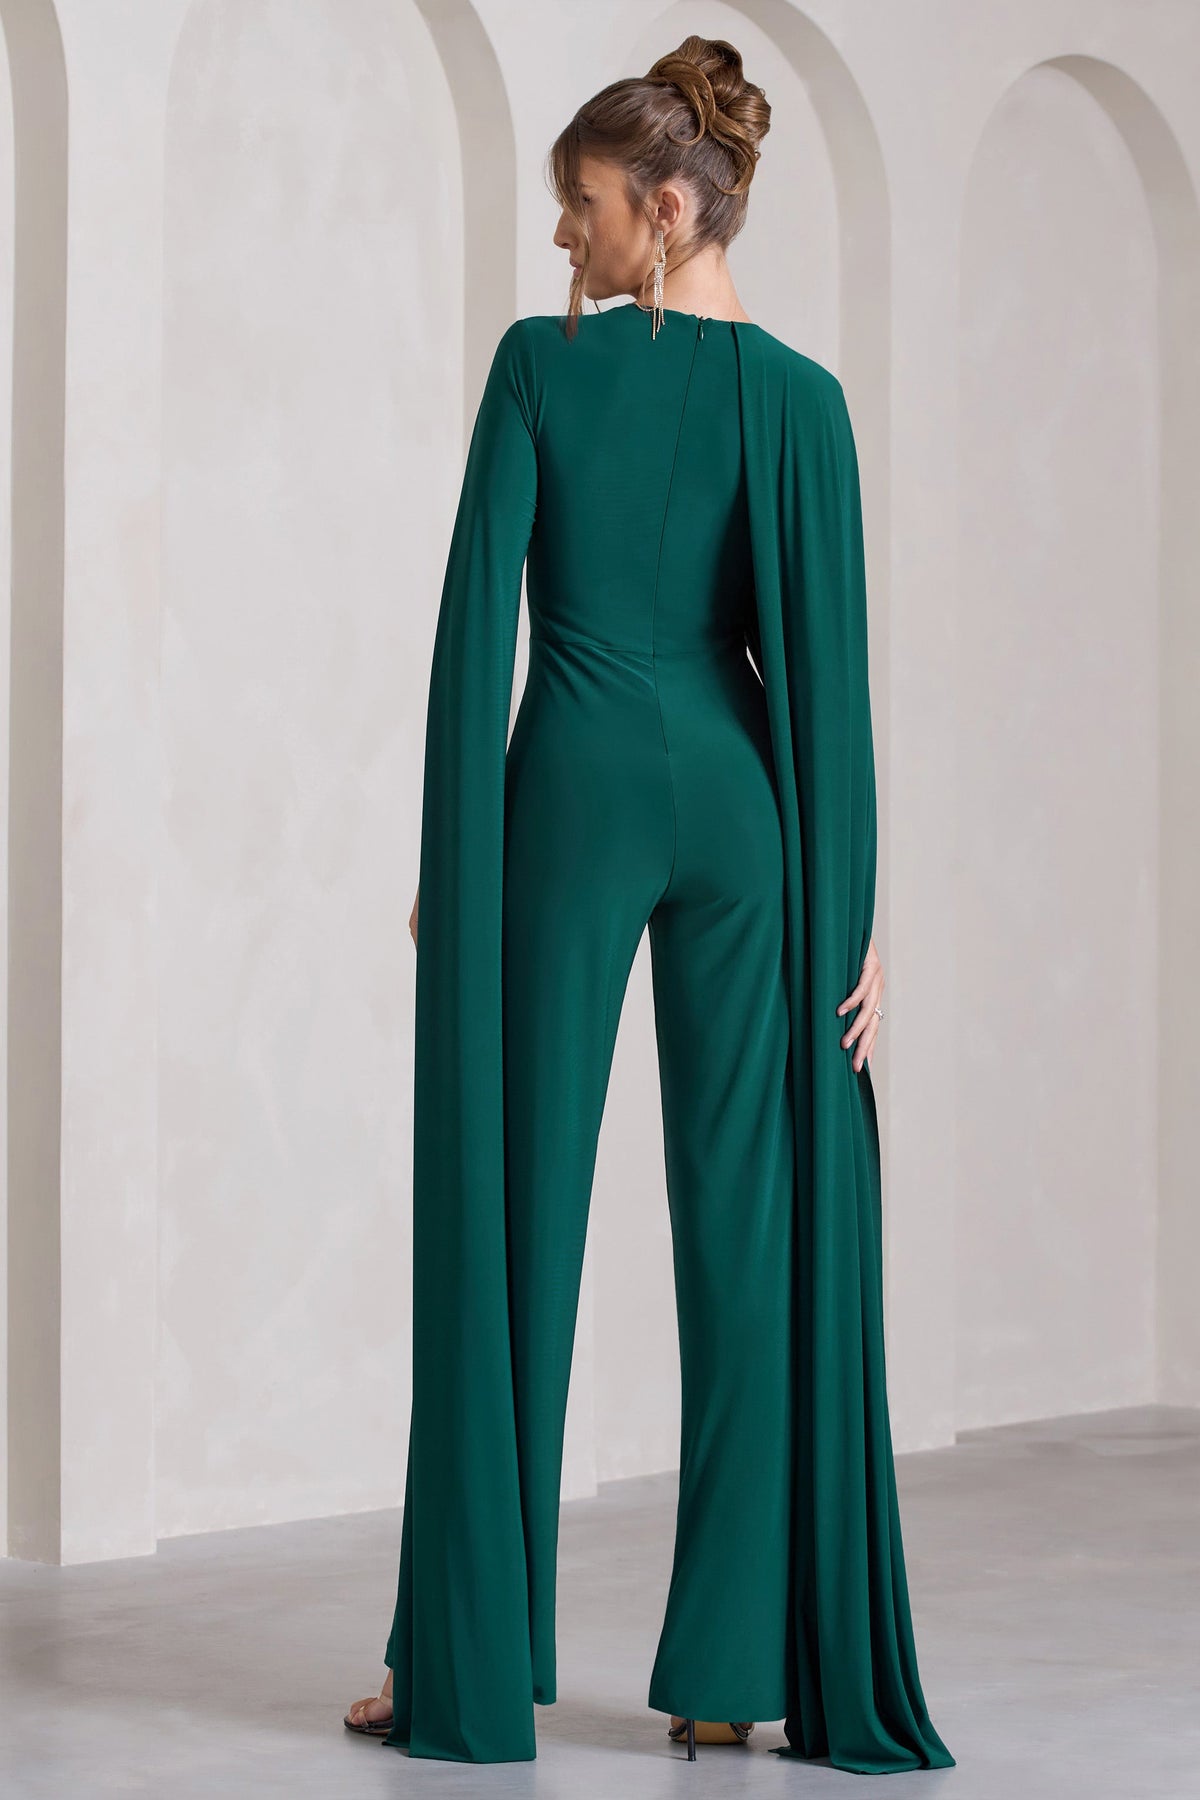 Capes Outfits Tops, Dresses & Jumpsuits Styles – Club L London - UK